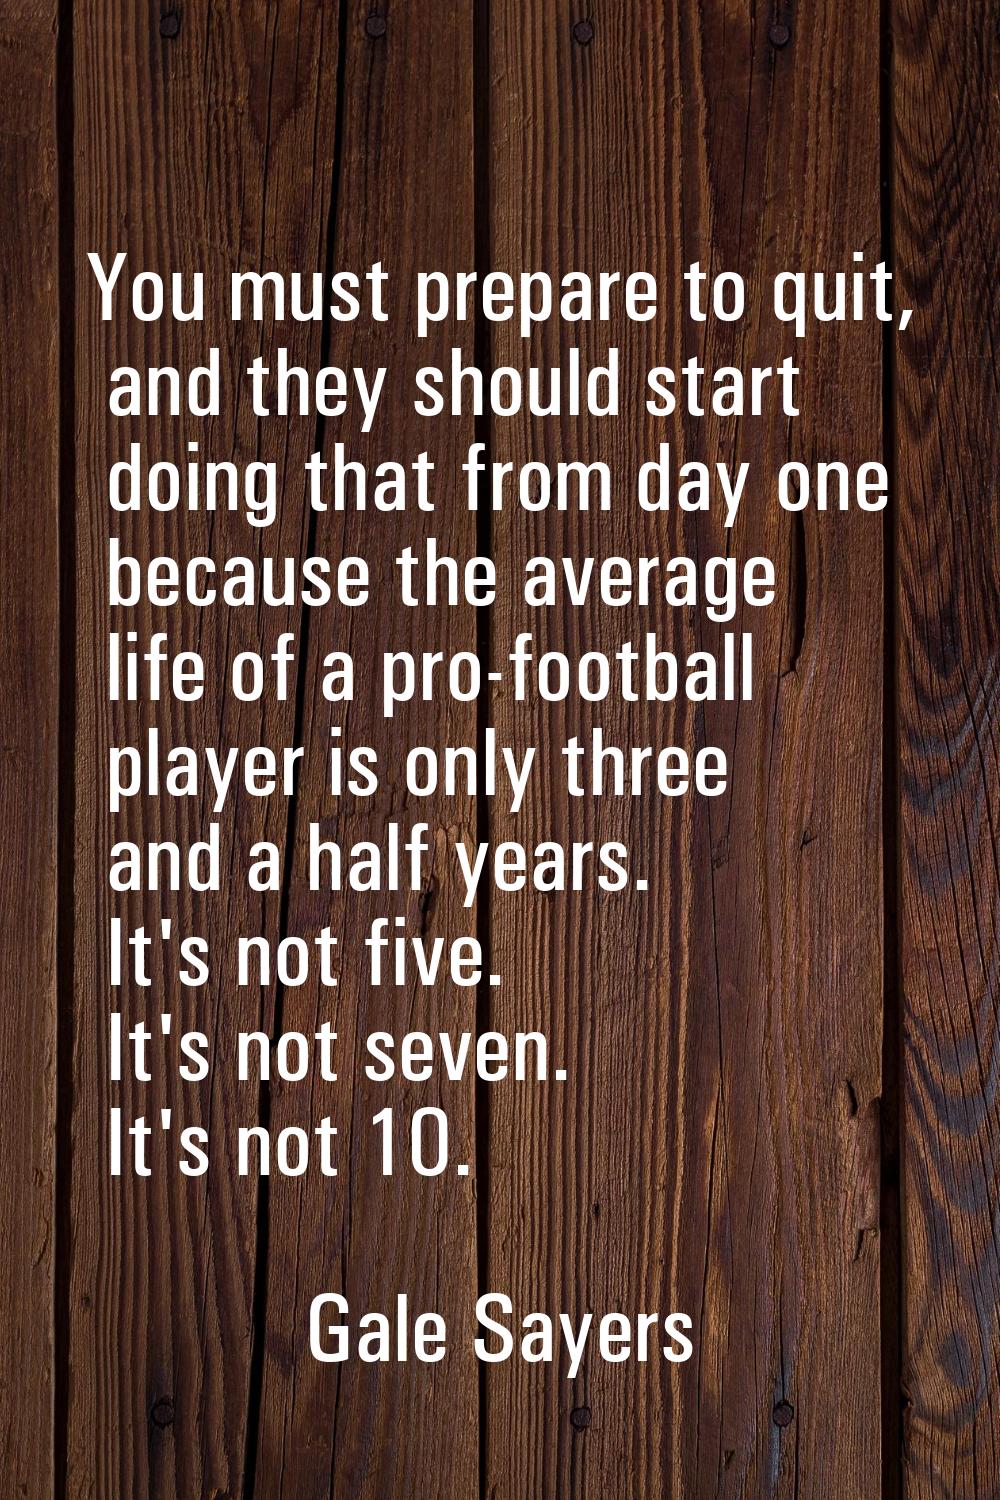 You must prepare to quit, and they should start doing that from day one because the average life of